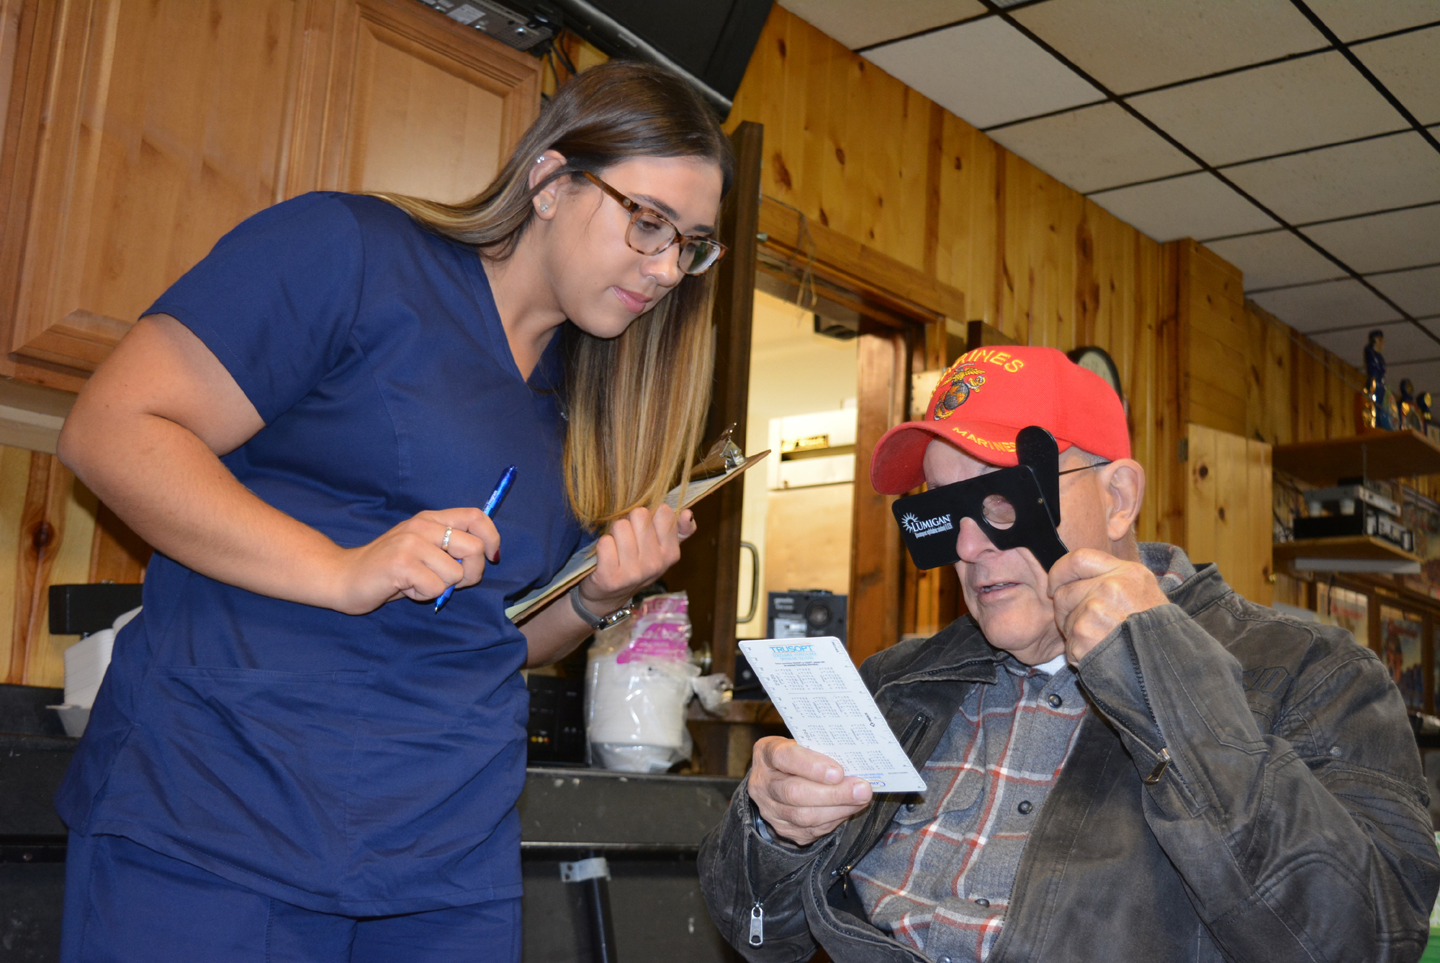 Oxford resident Hugh Syron, a Vietnam War veteran who served in the U.S. Marine Corps from 1965-69, gets his vision checked by  Kristen Cavazos, a student in the Ophthalmic Technician Program at Henry Ford College. Photo by C.J. Carnacchio.